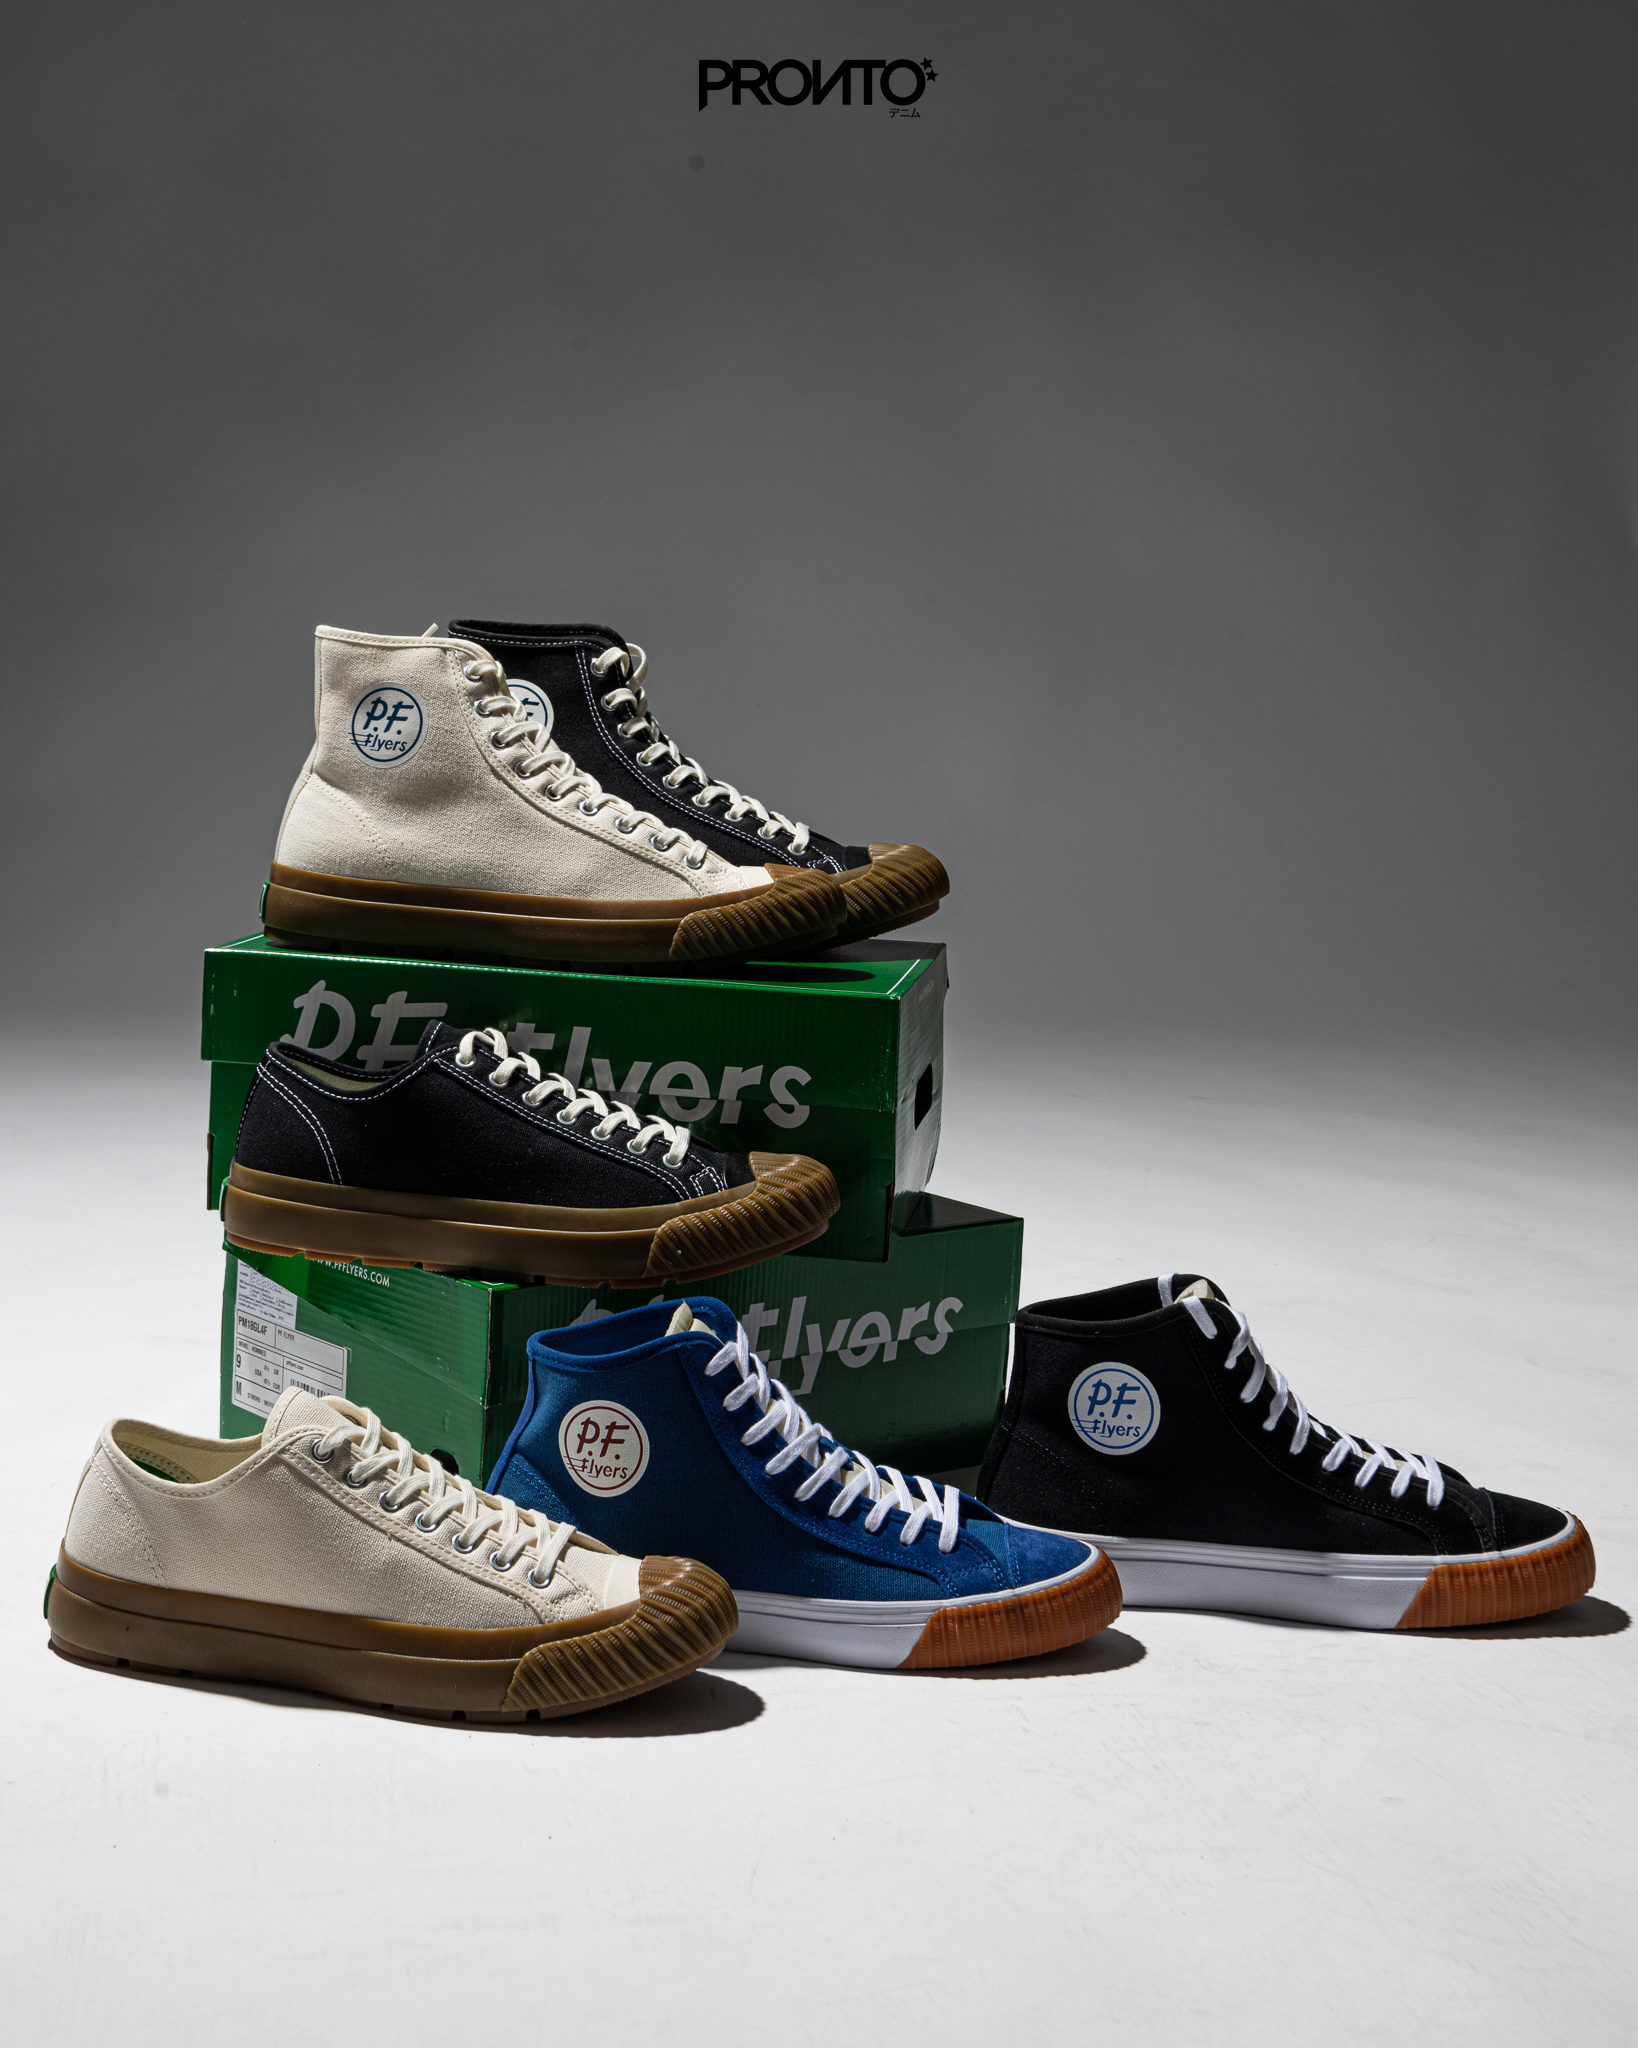 NEW ARRIVAL : PF FLYERS